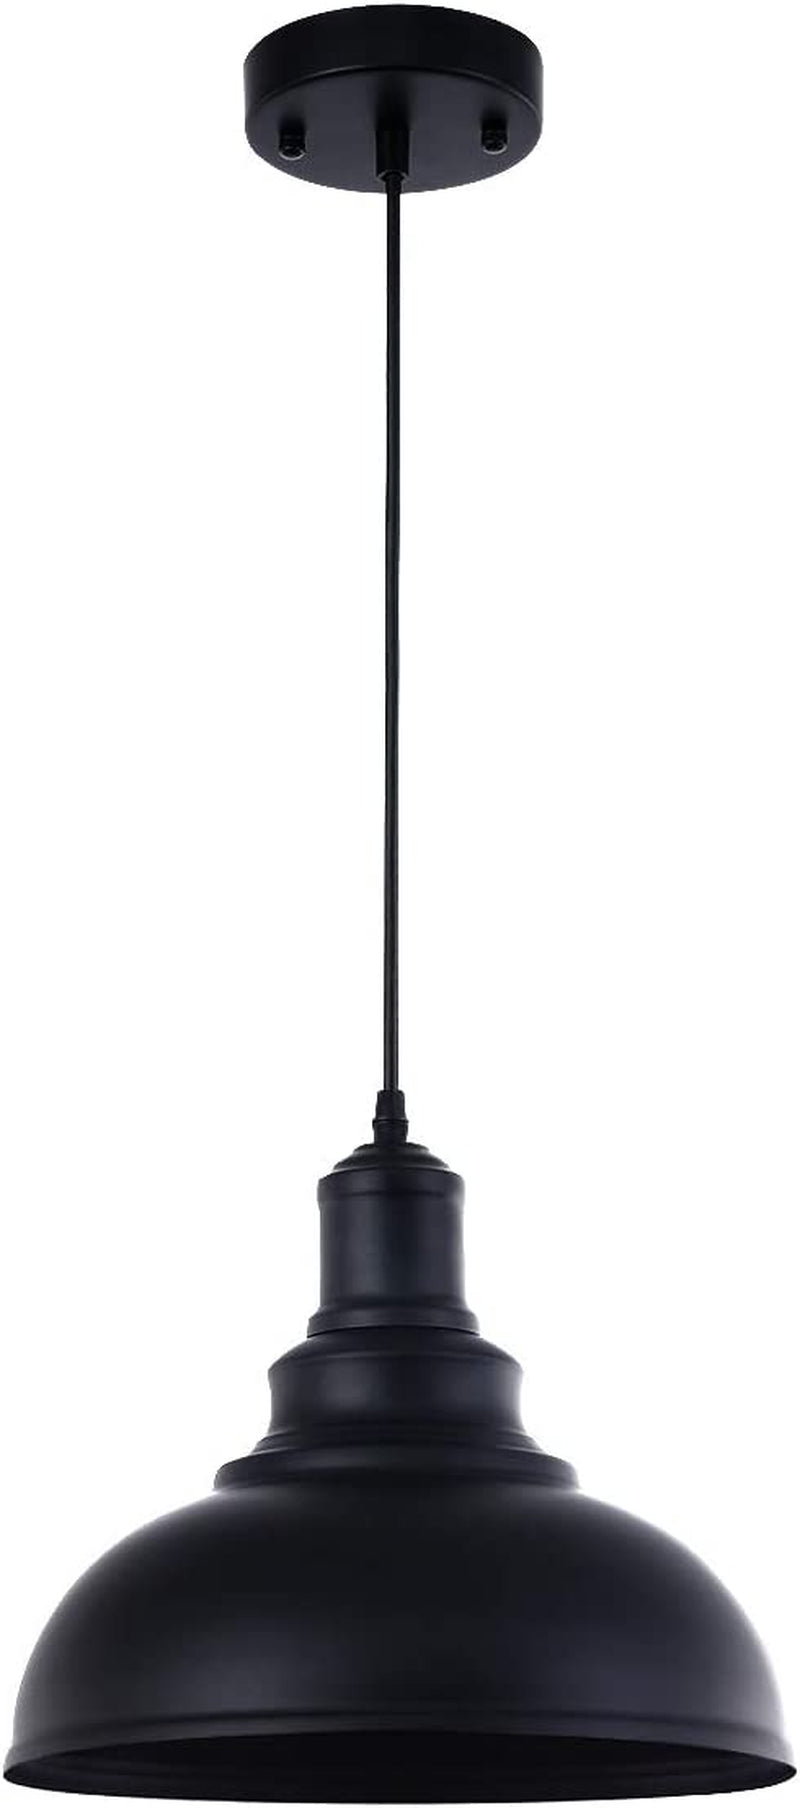 Mgloyht Pendant Lighting, Metal Rustic Vintage Farmhouse Ceiling Lamp, Hanging Light Fixtures with E26 Base, Industrial Black Pendant Lights for Hallway Kitchen Island Dining Room Living Room